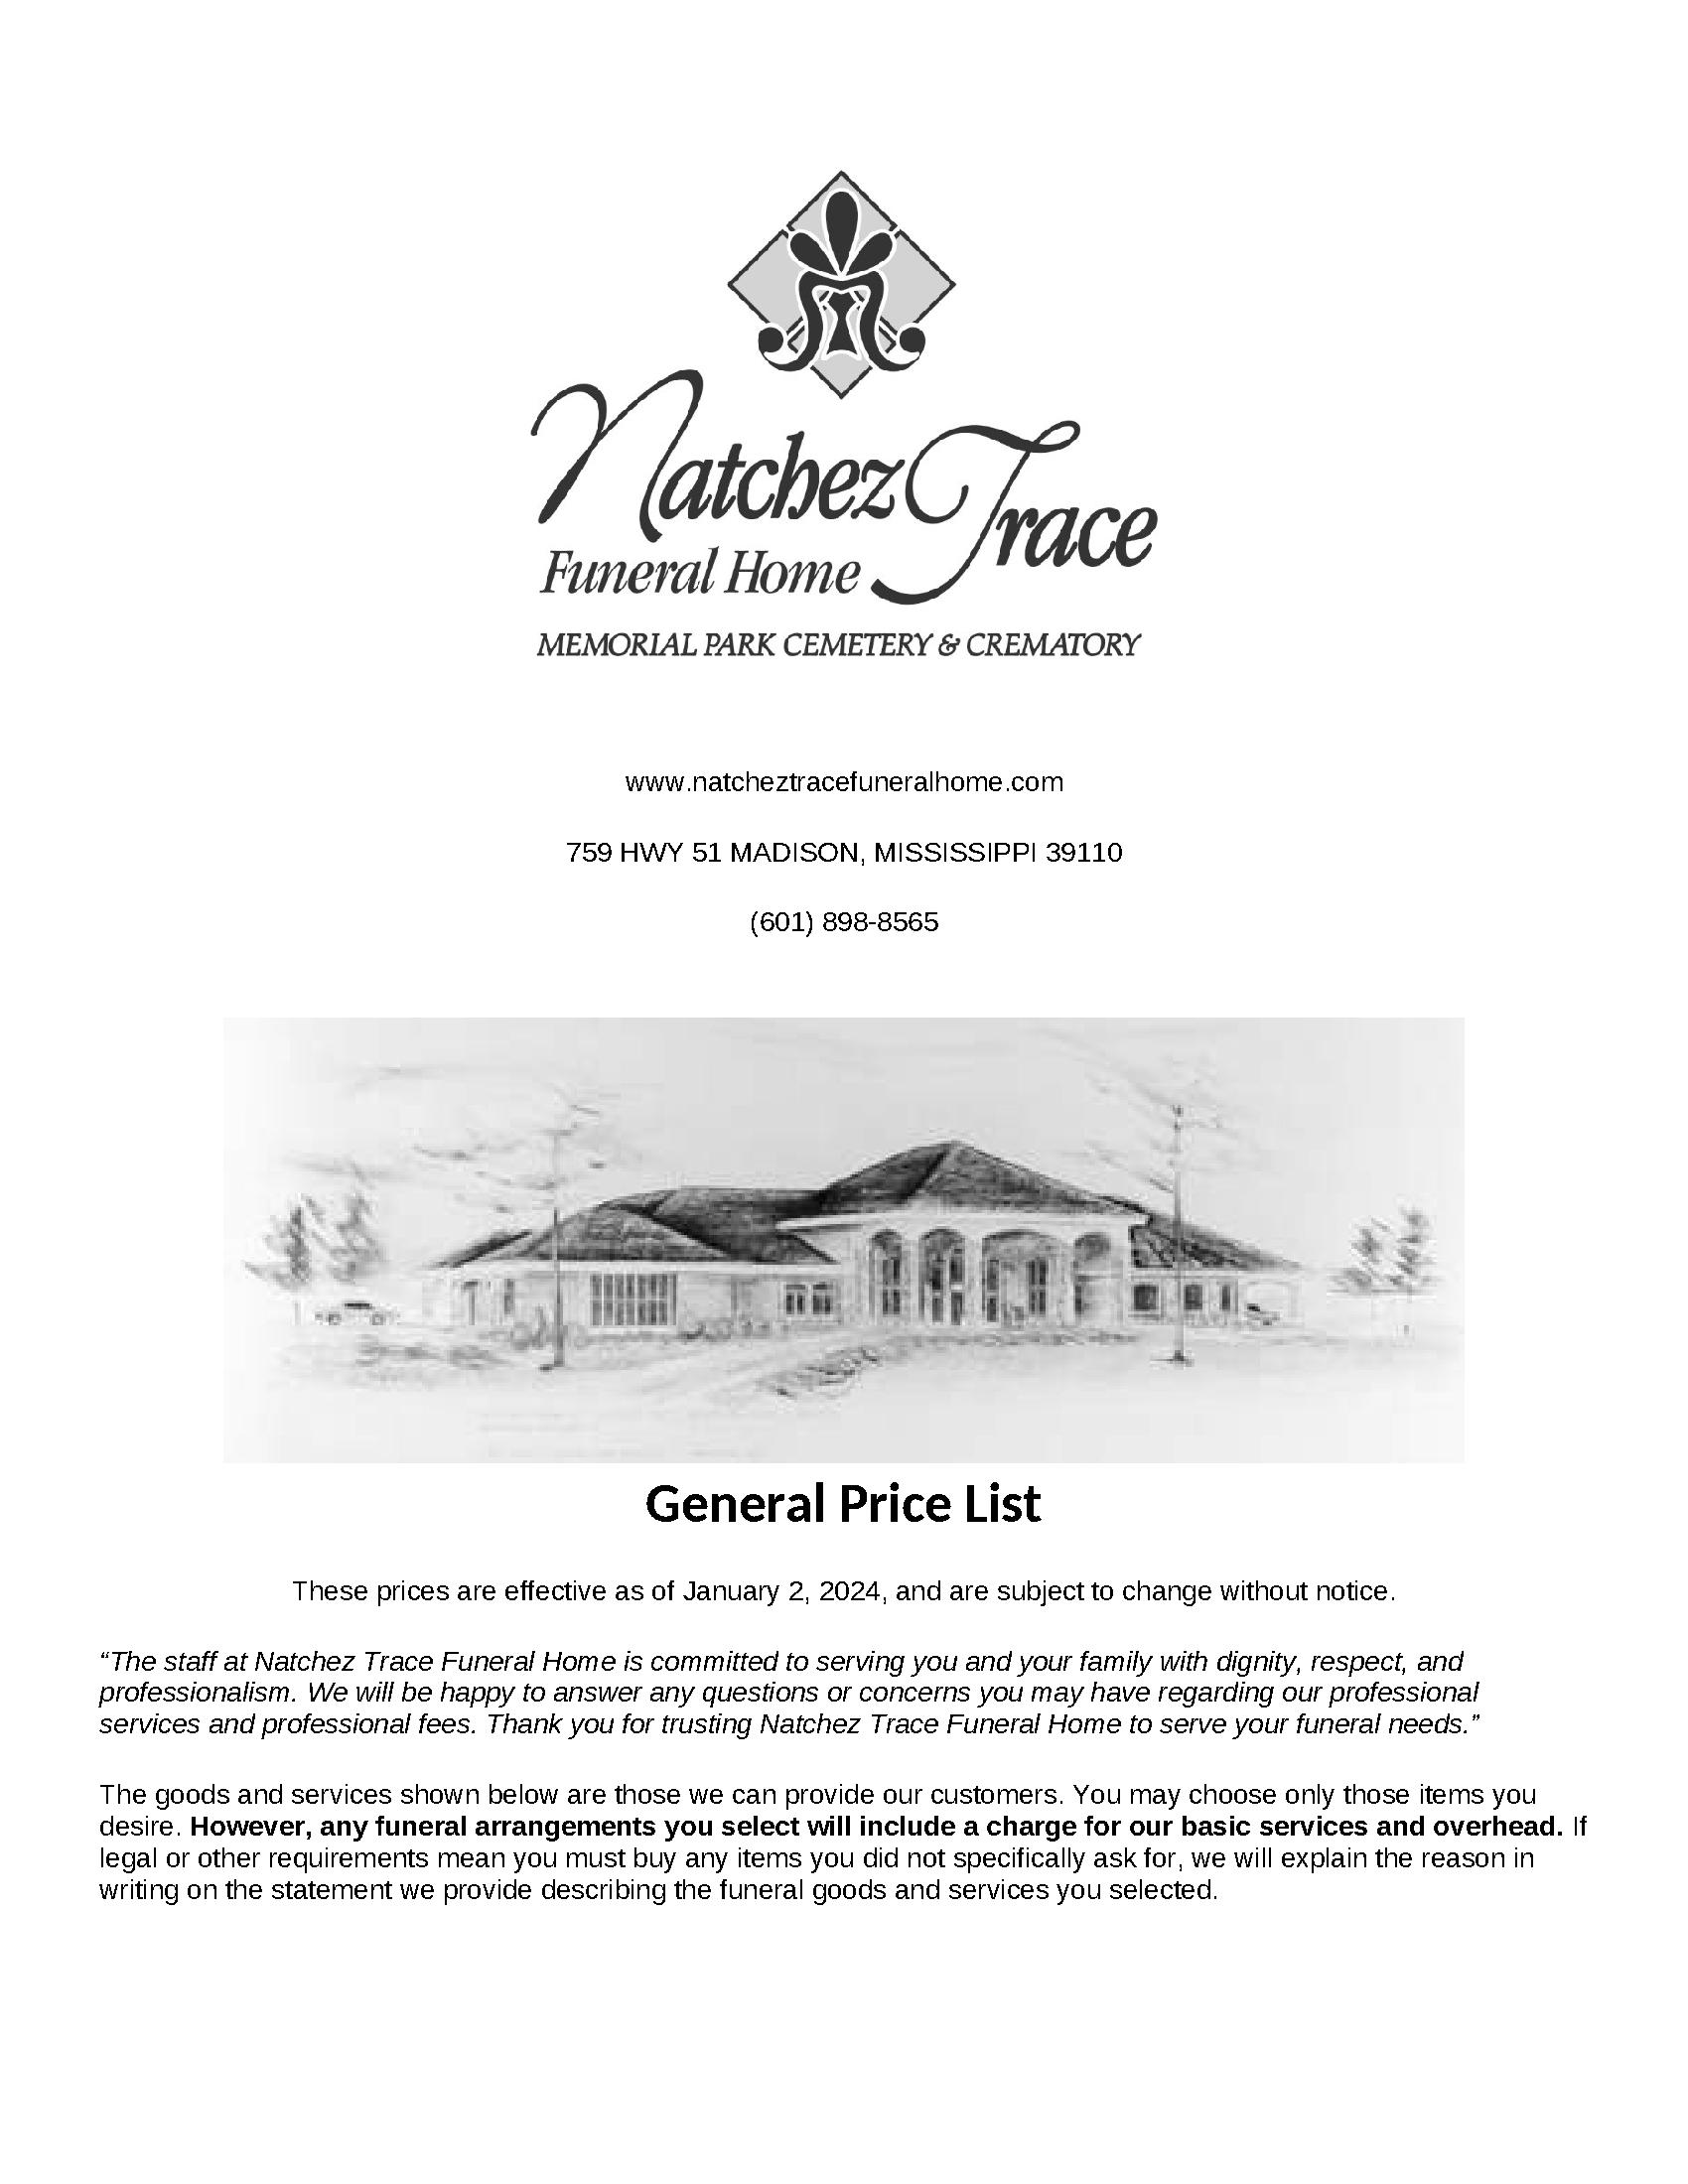 Natchez Trace Funeral Home 
Memorial Park Cemetery & Crematory  
General Price List January 2, 2024